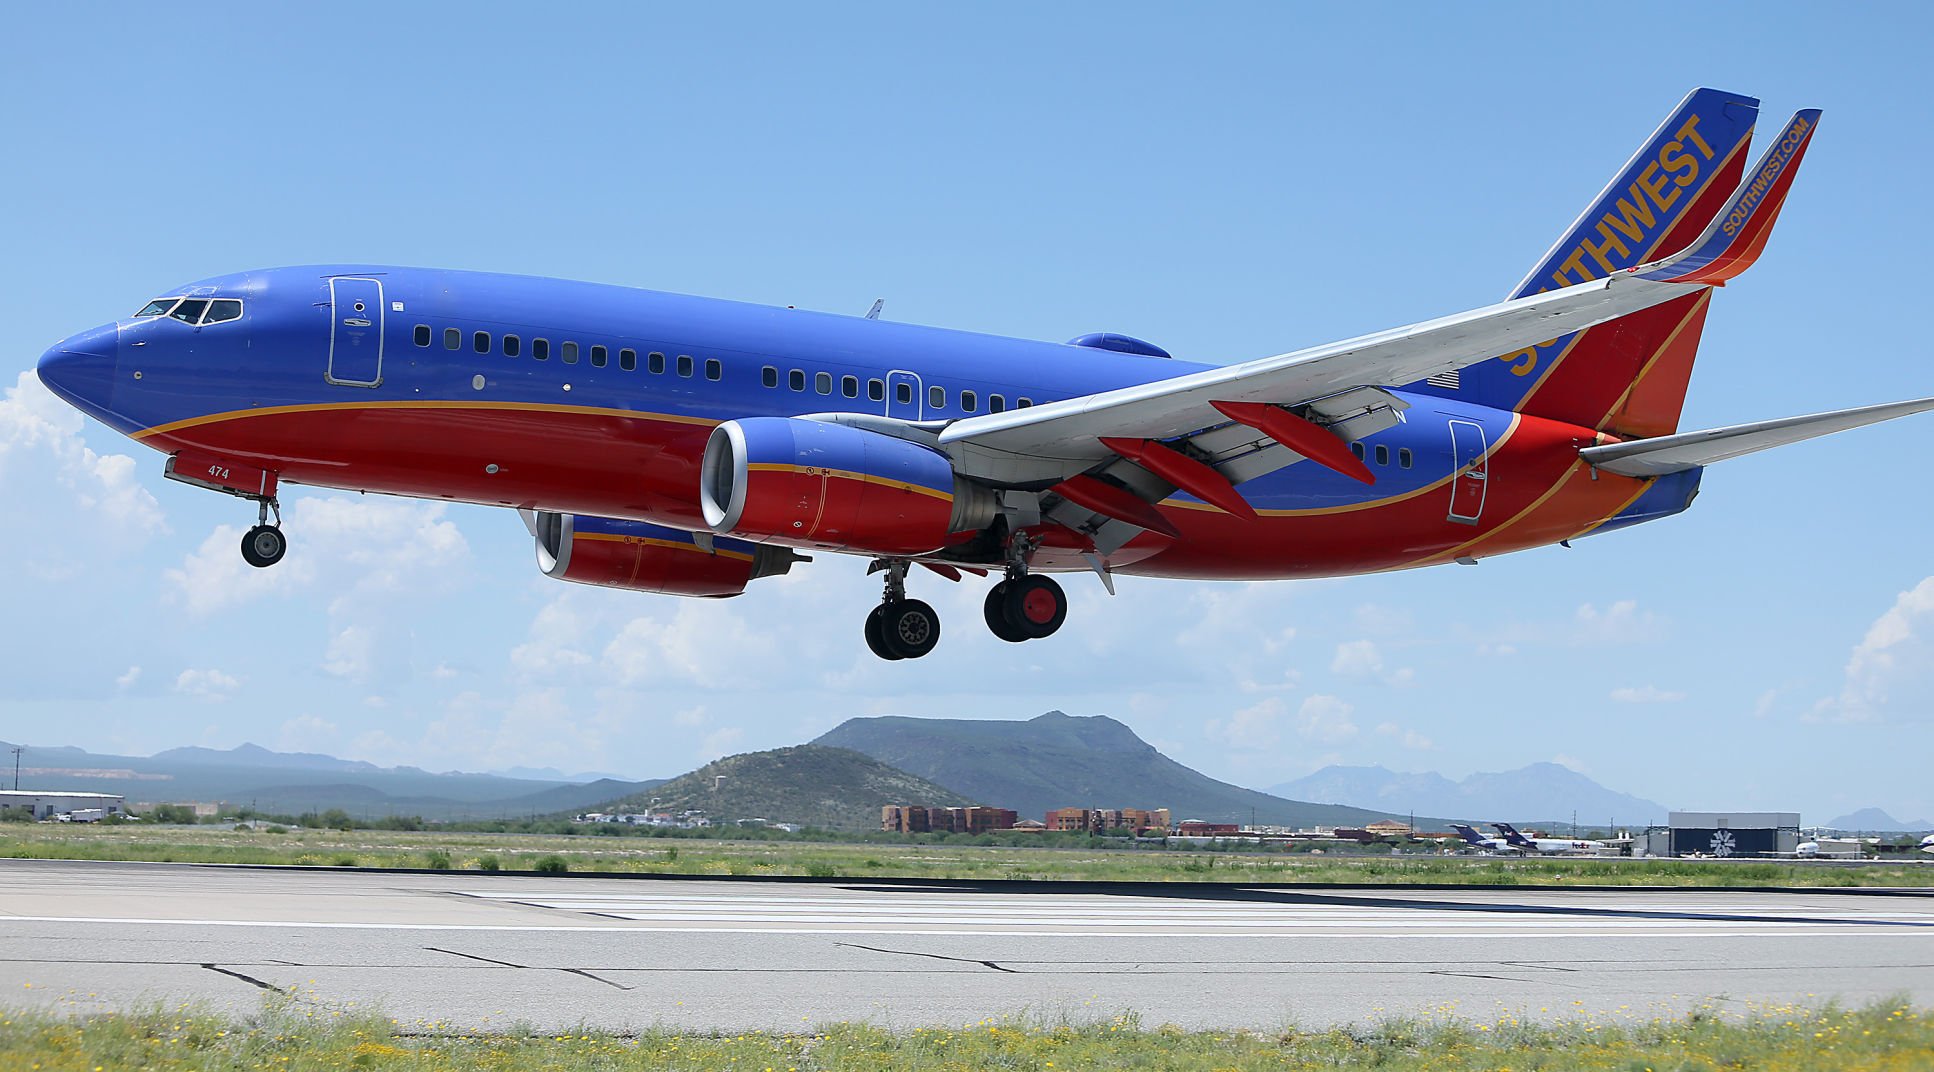 southwest airlines $29